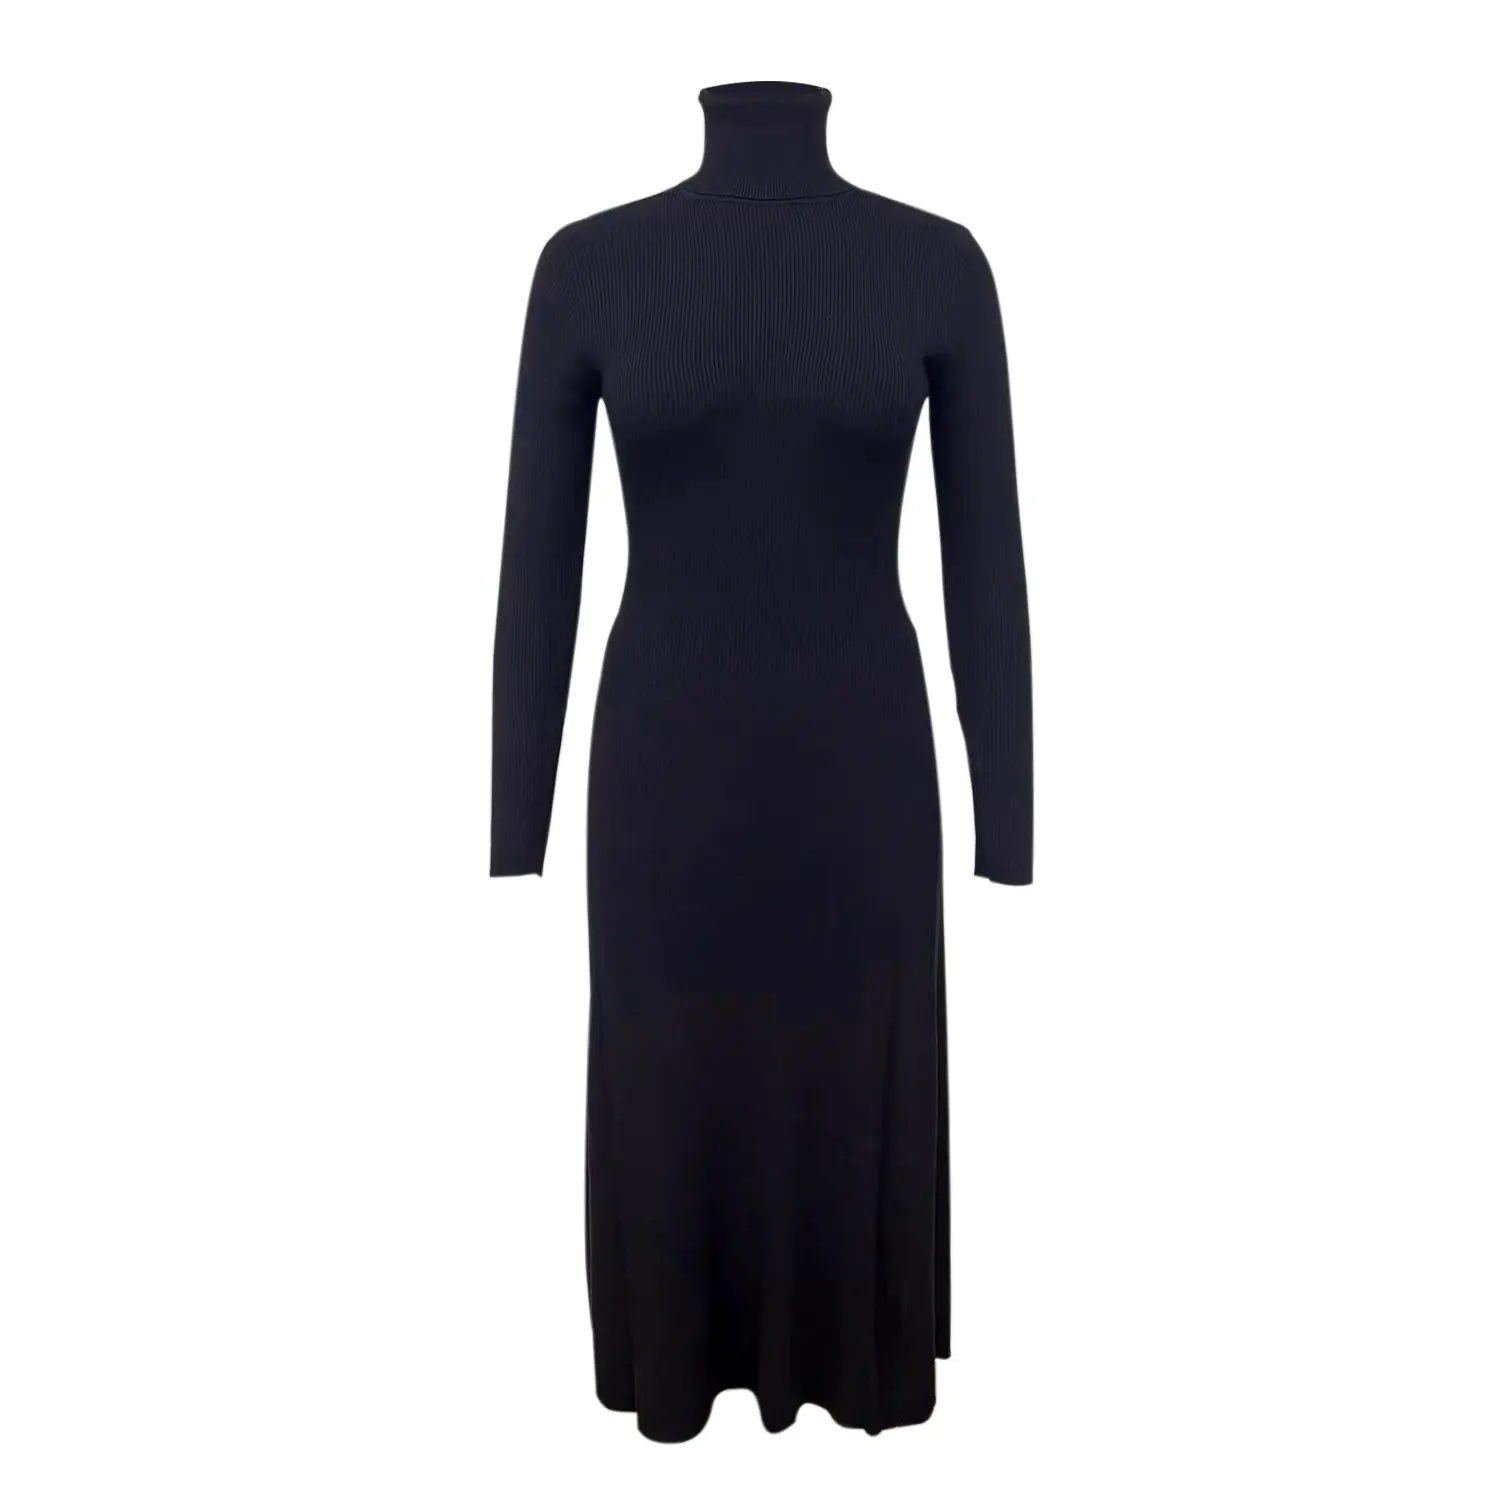 RTS Autumn Winter Long Sleeve Ib Knitted Dress Women'S Solid Color Black High Necked Warm Casual Basic Sweater Dress